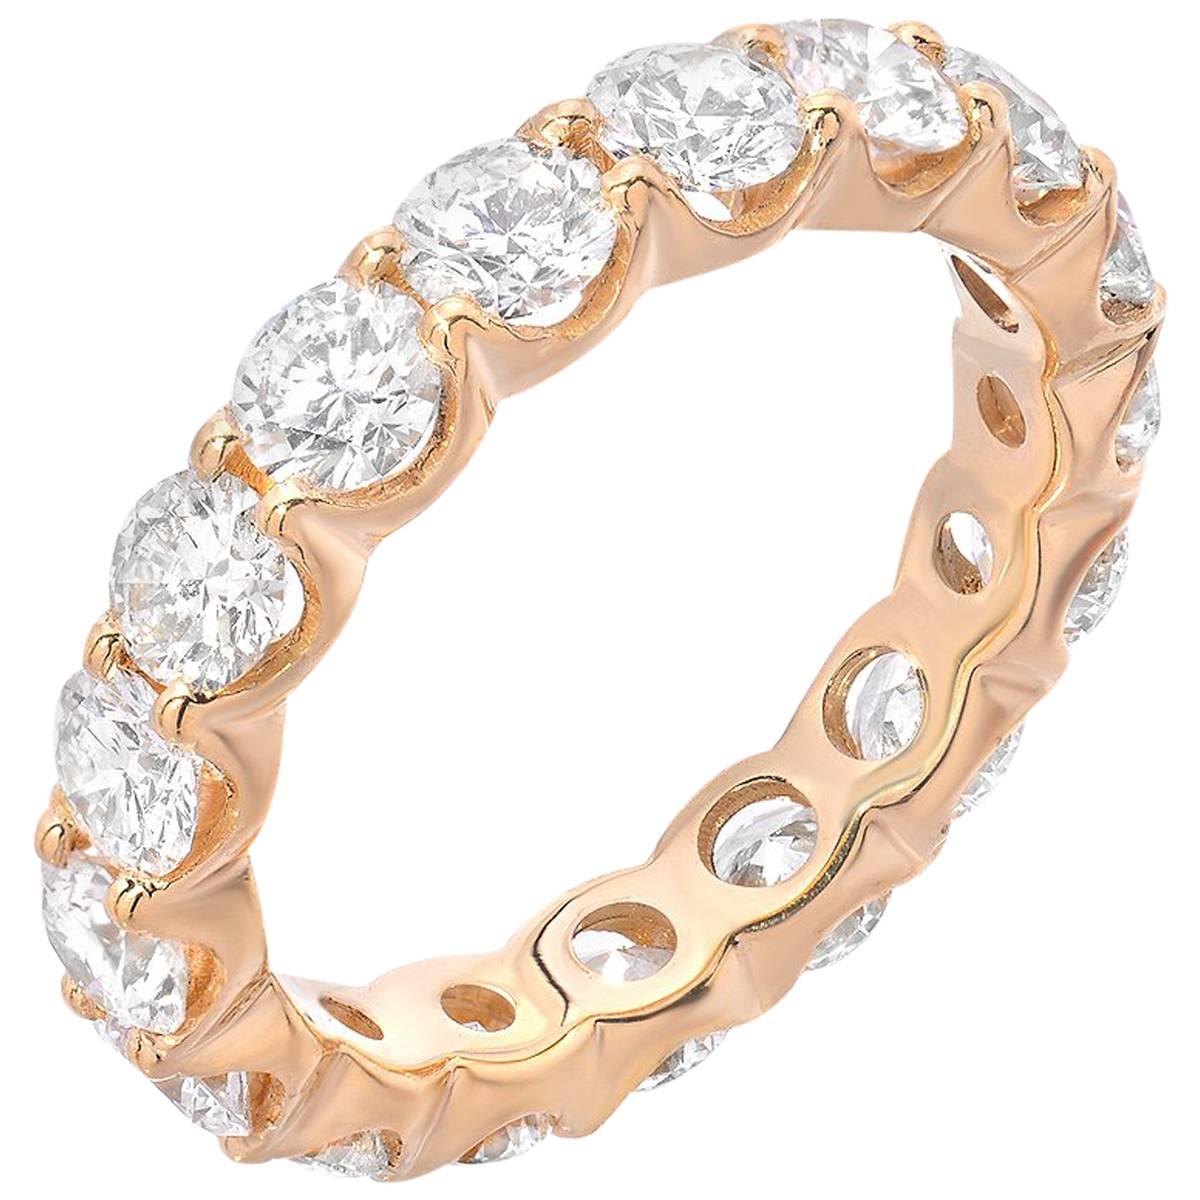 Boorma 18 Karat Yellow Gold 3.31 Carat VS 1 G Color Eternity Band  For Sale